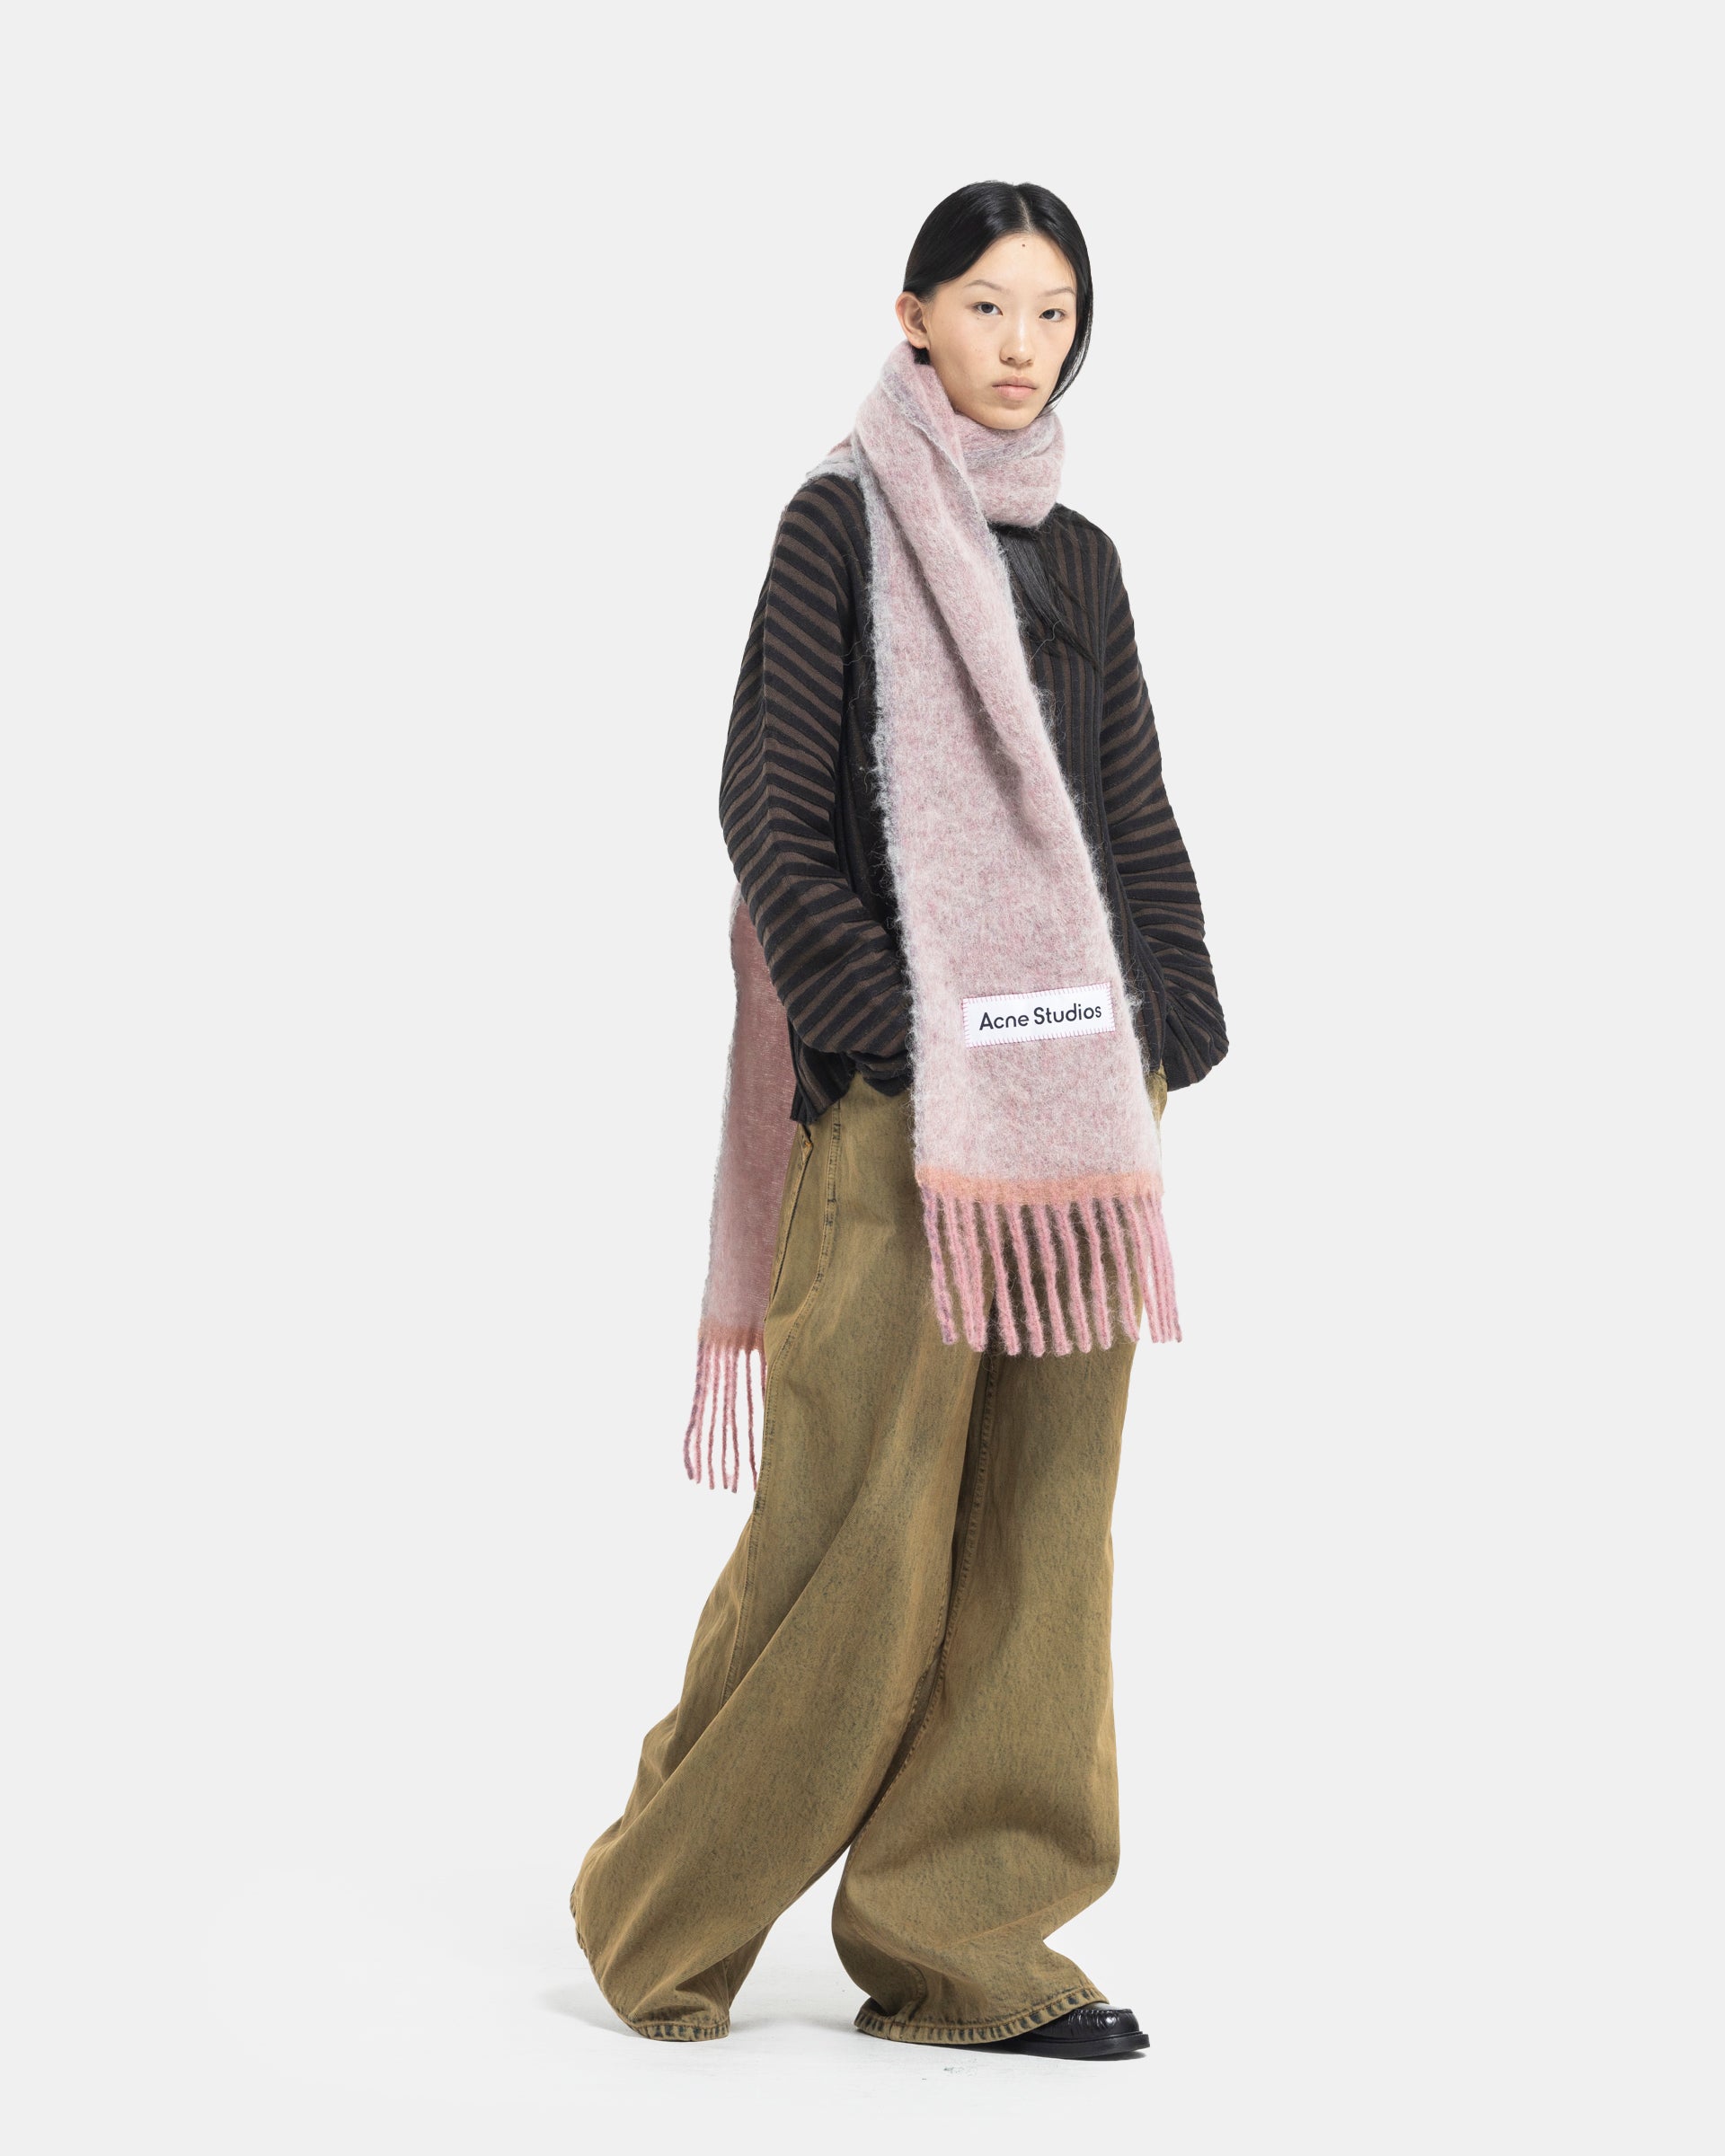 Female model wearing Eckhaus Latta Designer Wool Brown Sweater with knit stripes and Acne Studios Mohair Scarf